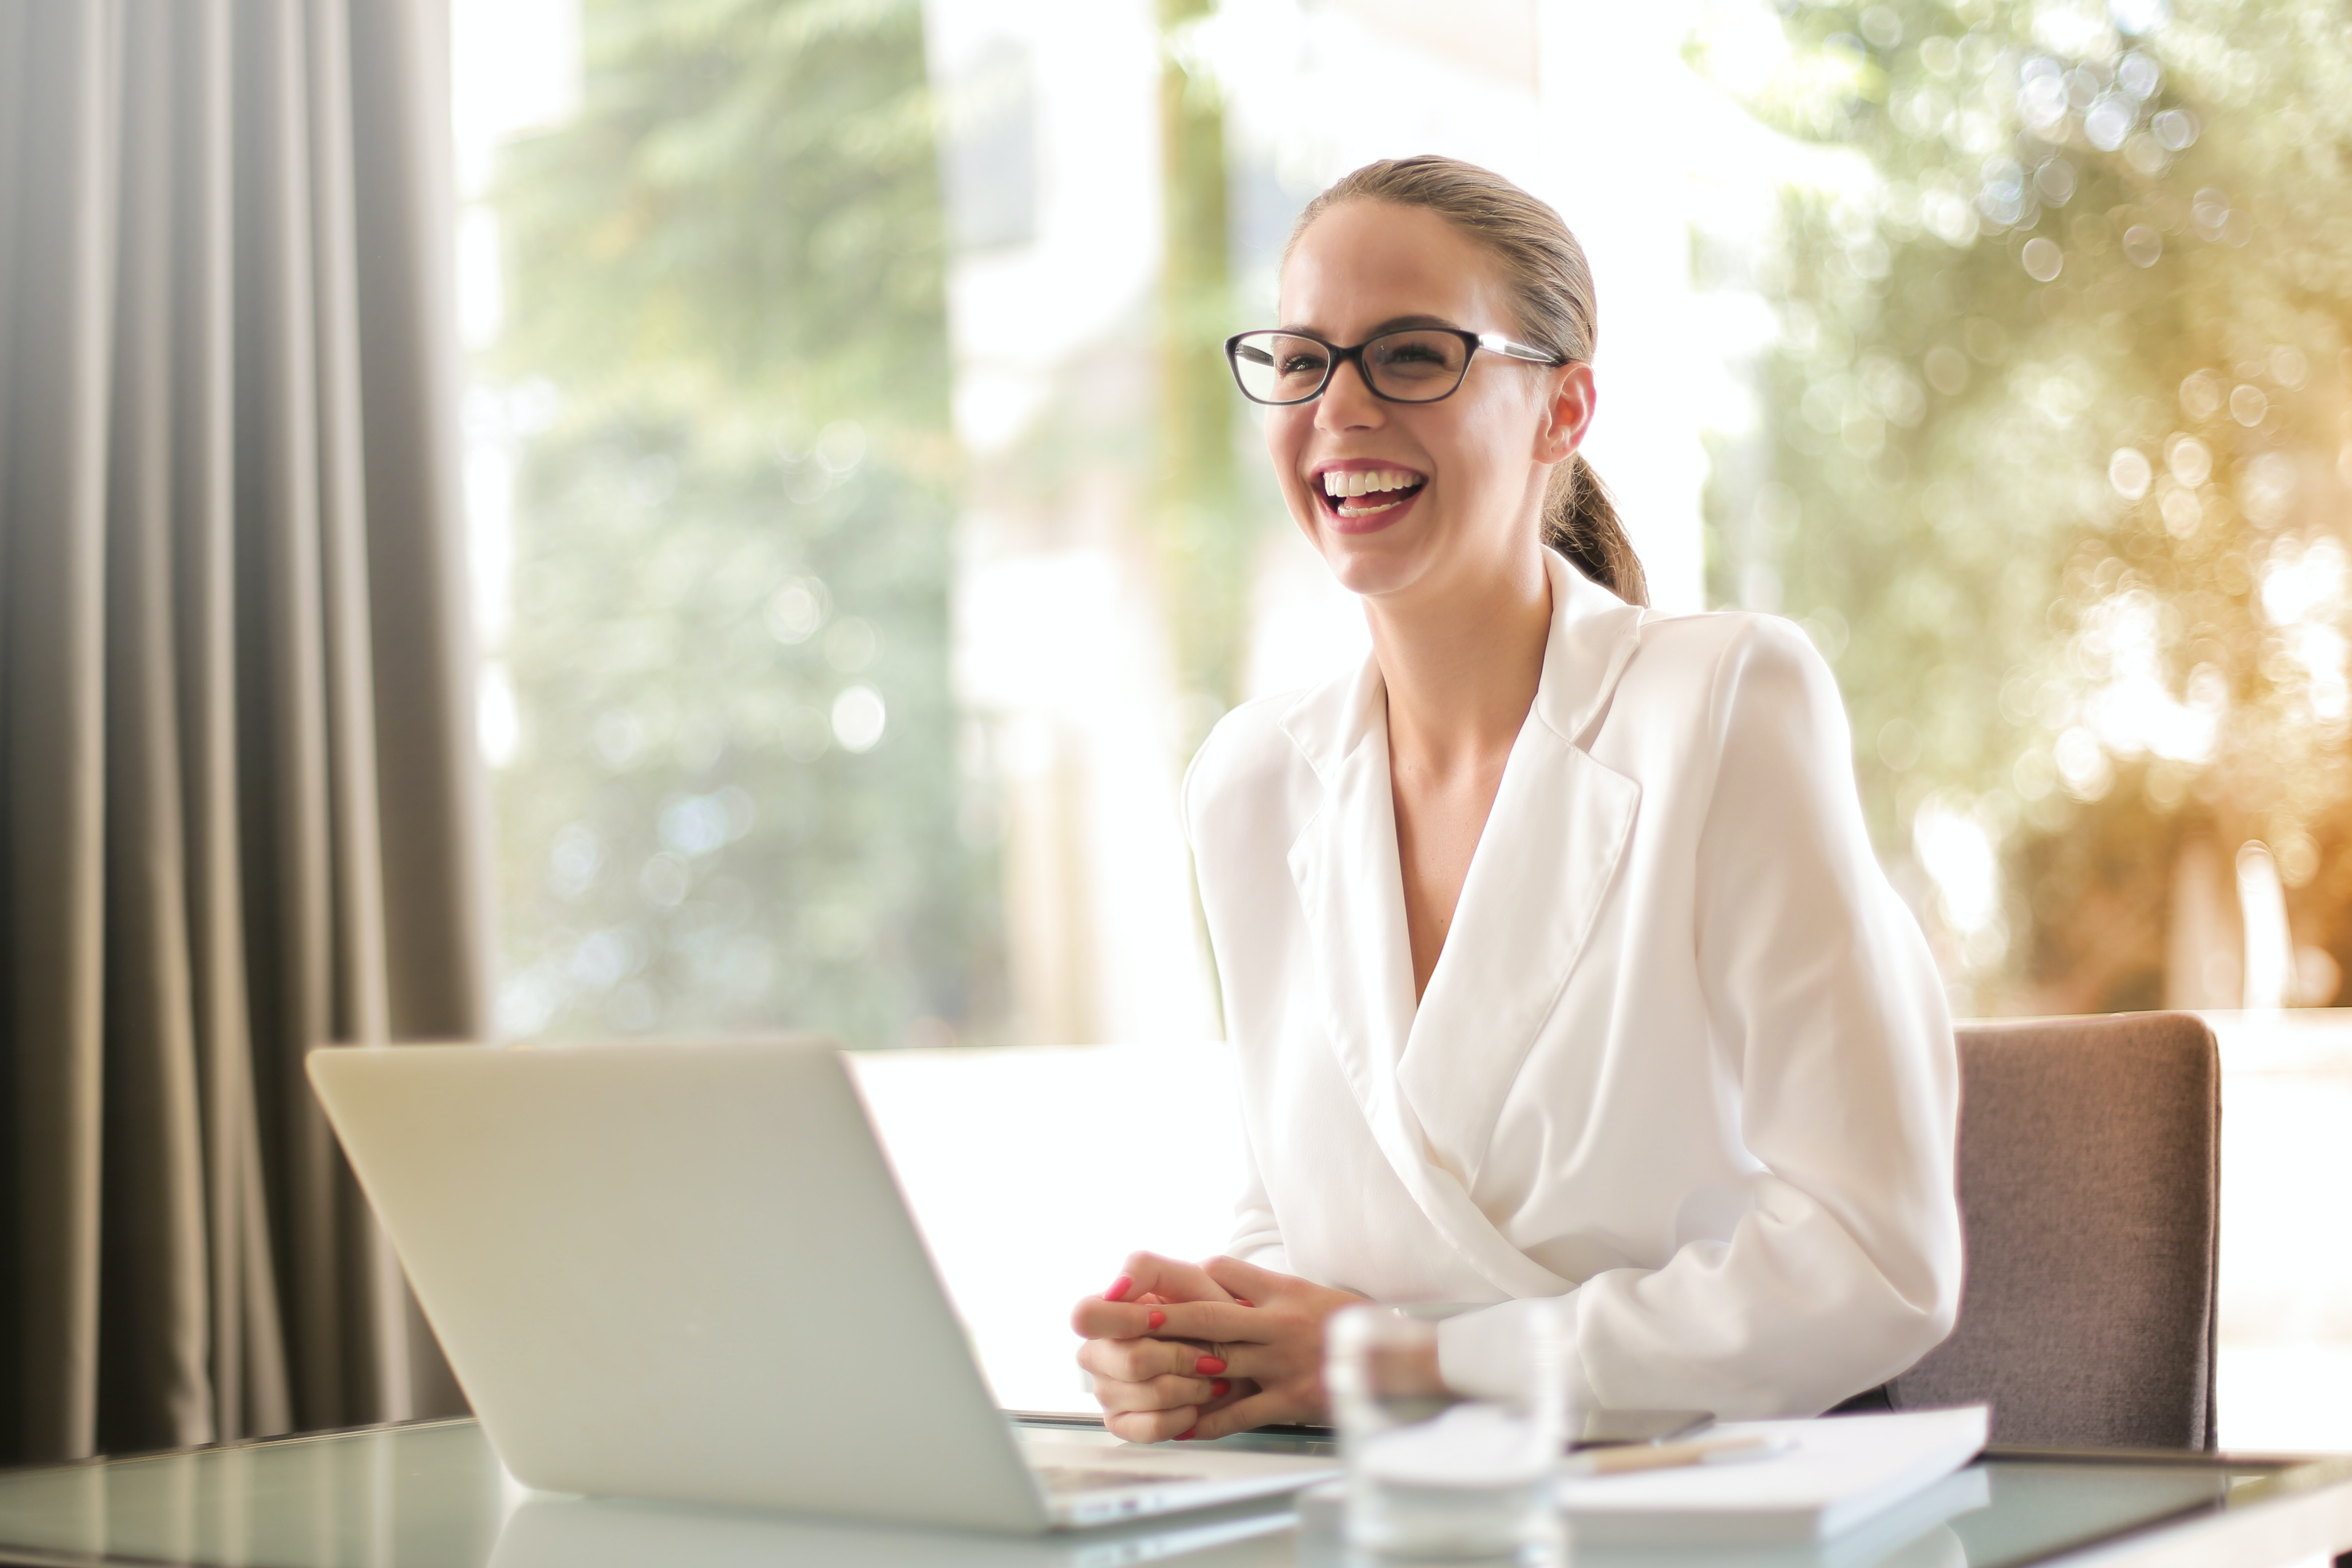 A working woman laughing with a laptop in front of her | Source: Pexels